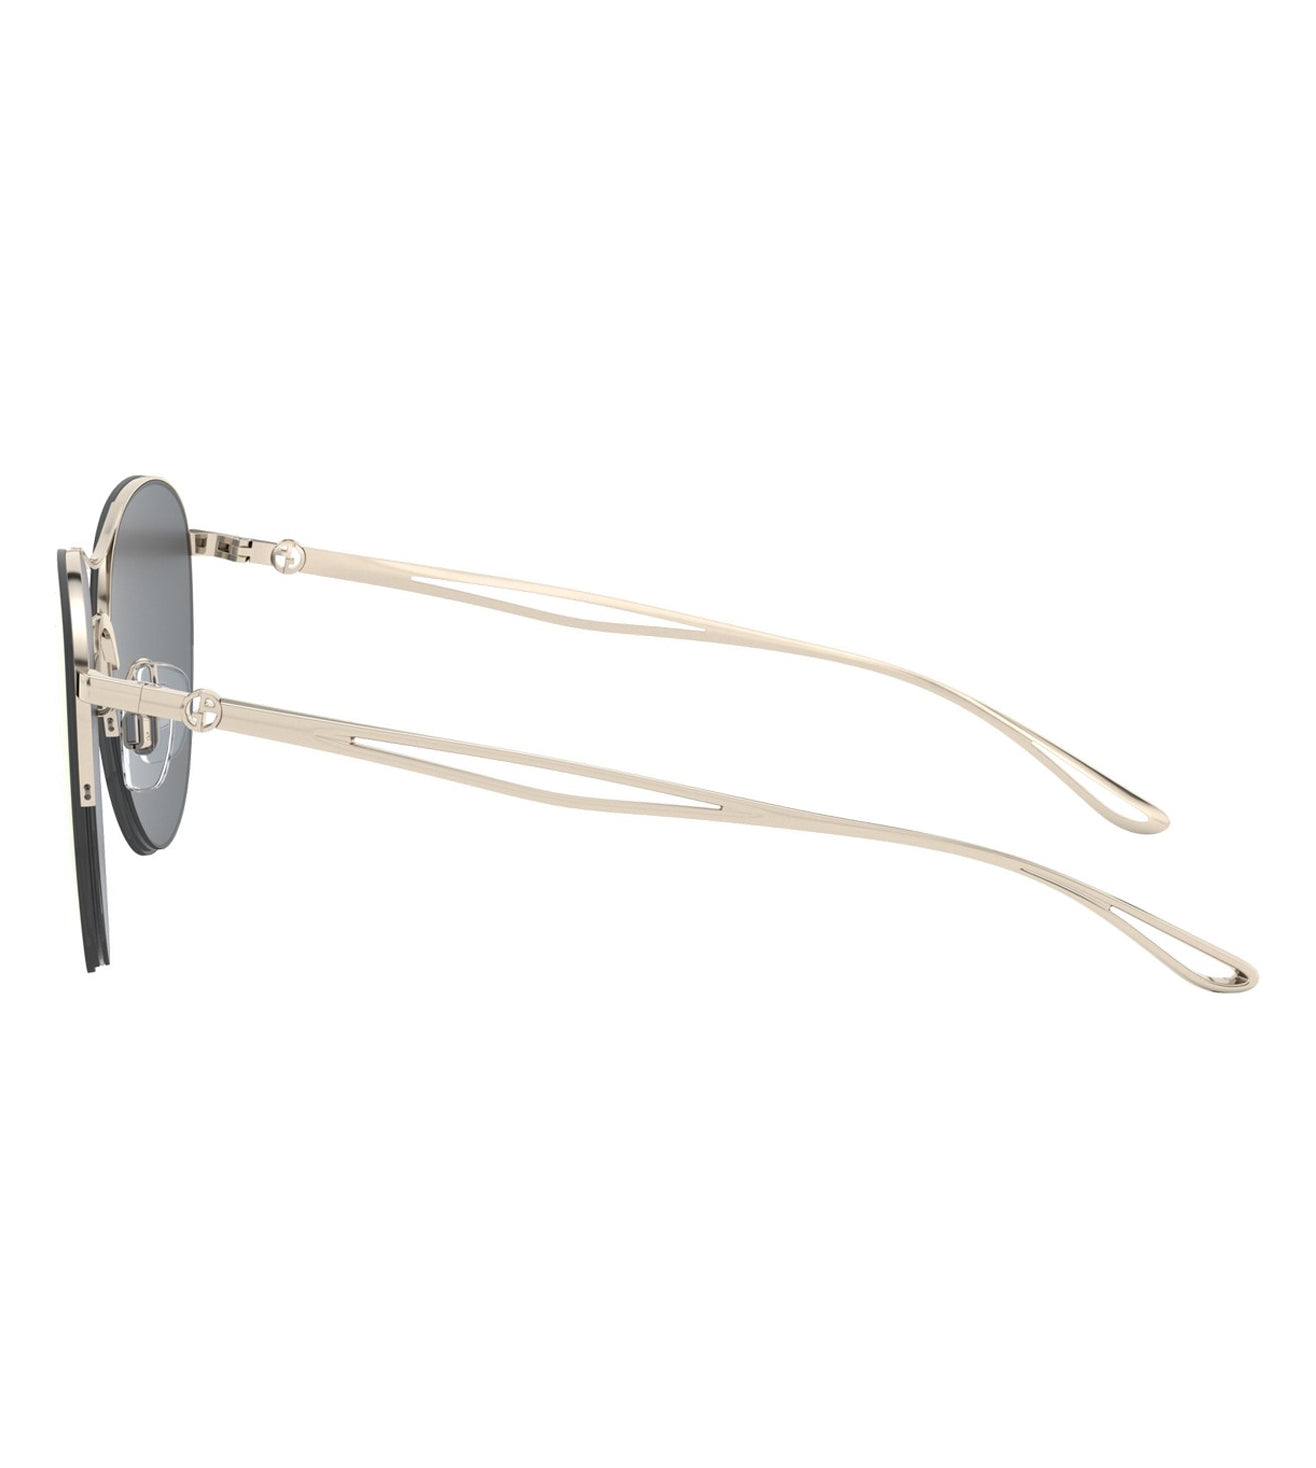 Round Silver And Pink Lens Sunglasses